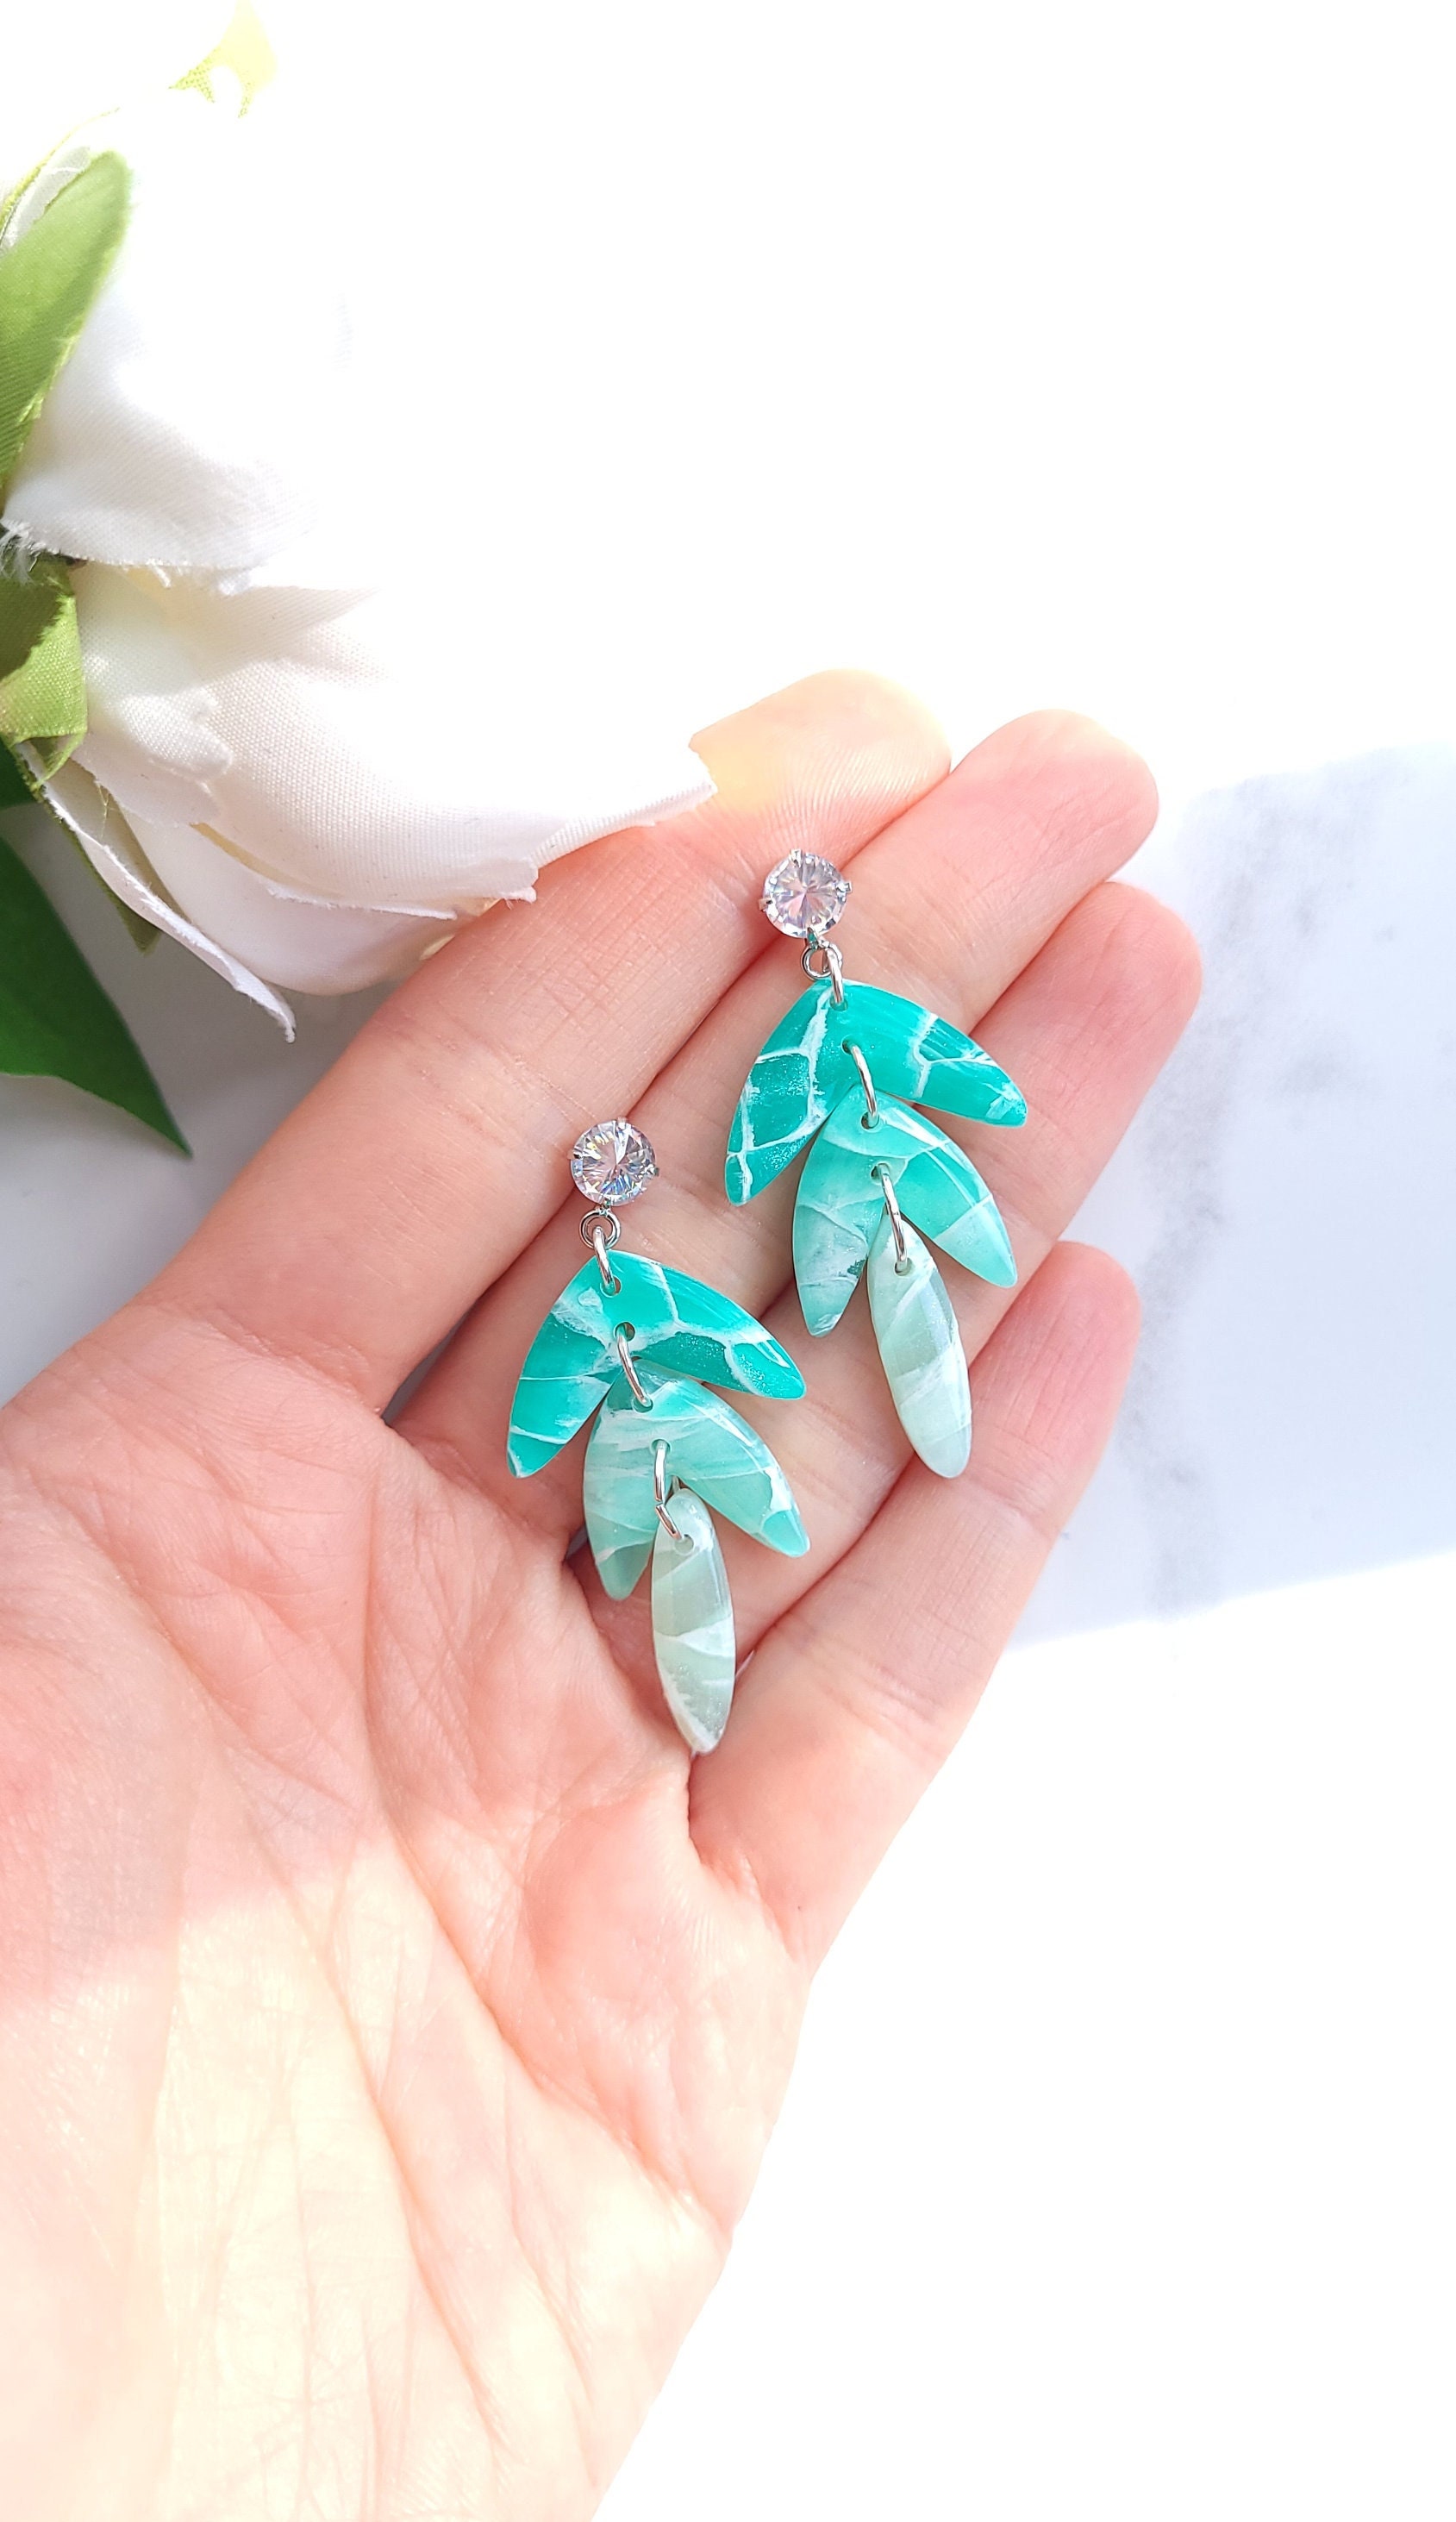 Turquoise Gradient & White Marble Earrings | Handmade Polymer Clay Statement Dangle